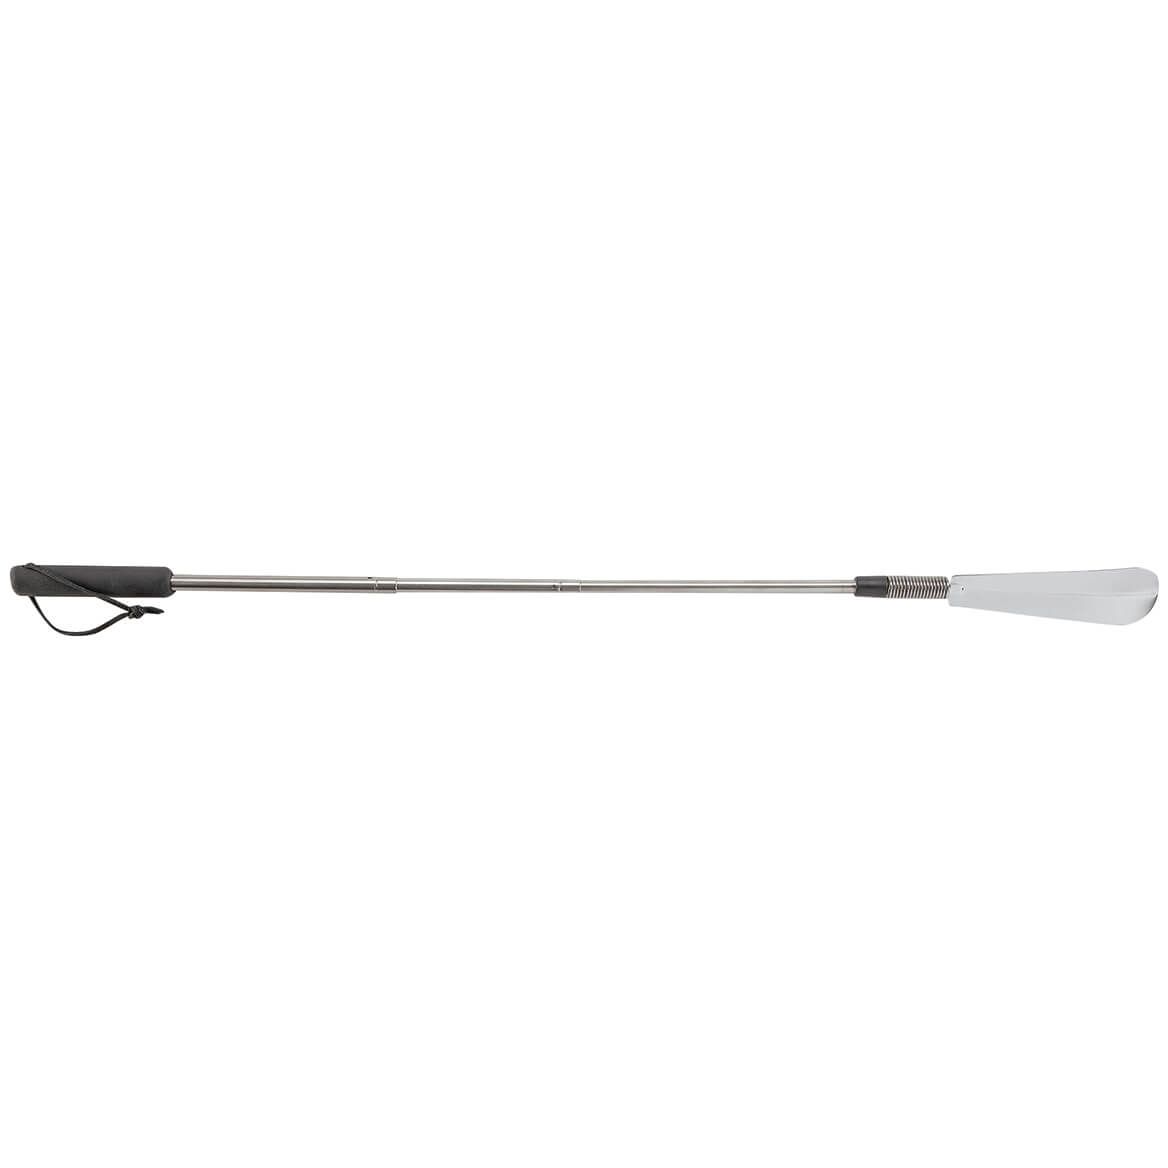 Stainless Steel Telescopic and Flexible Shoehorn by LivingSURE™ + '-' + 377061